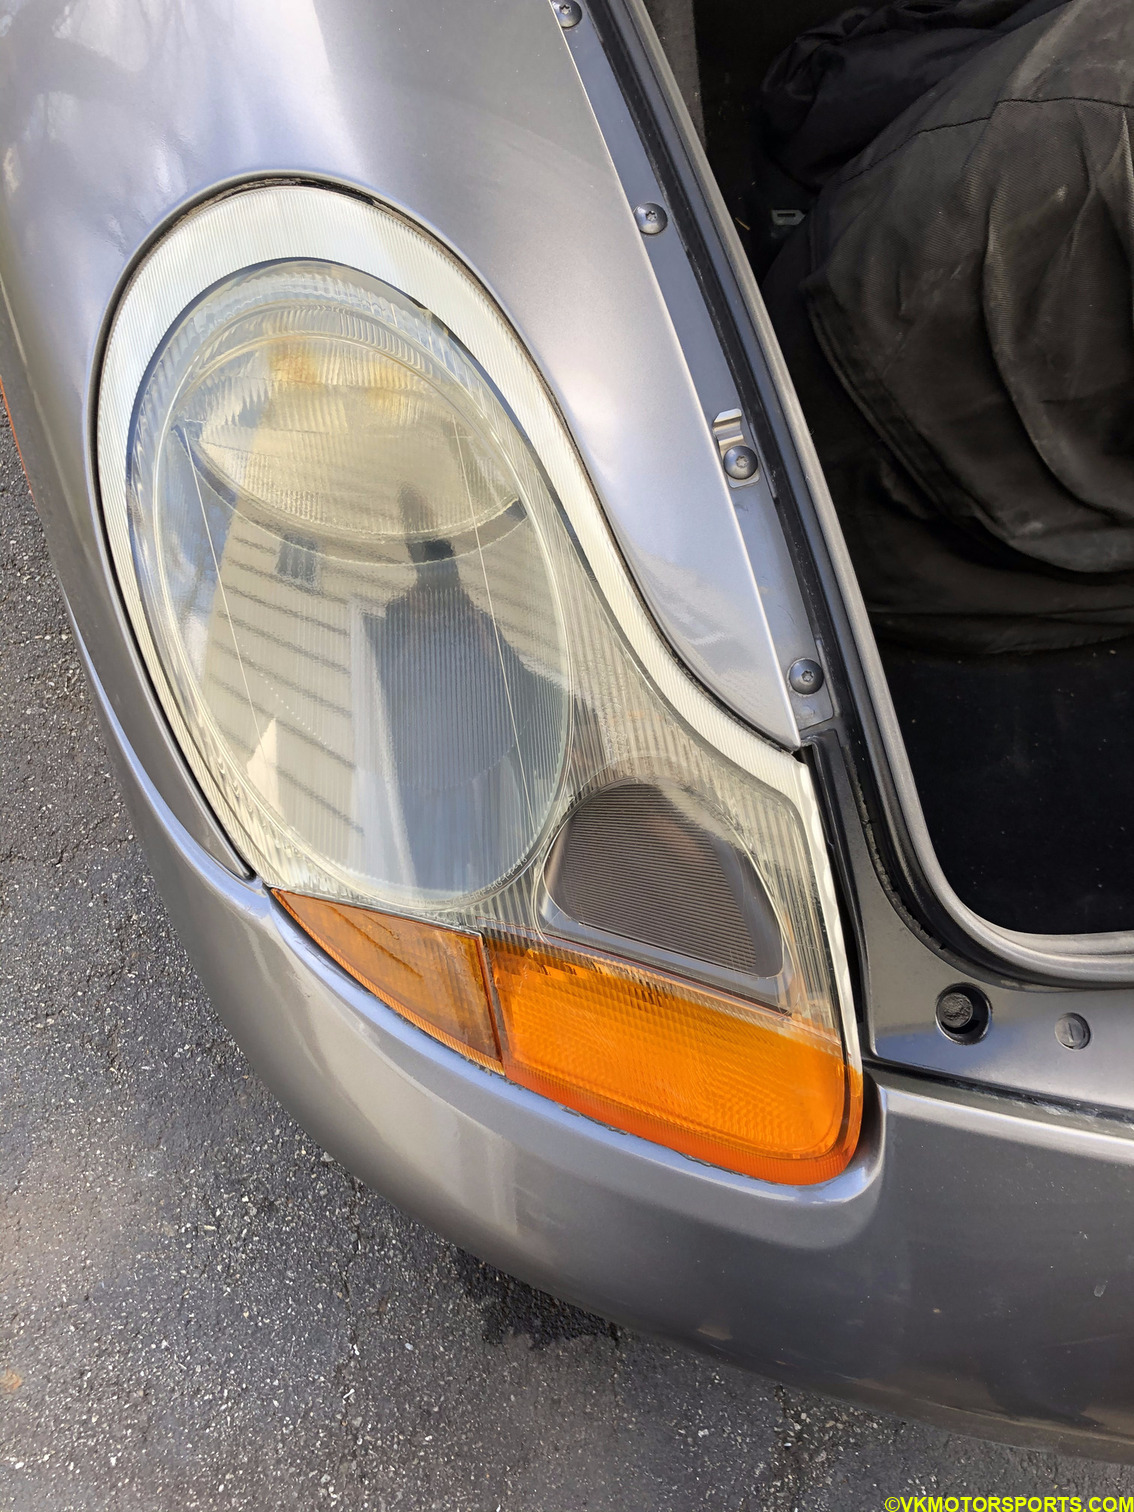 Figure 25. Passenger light with clear coat